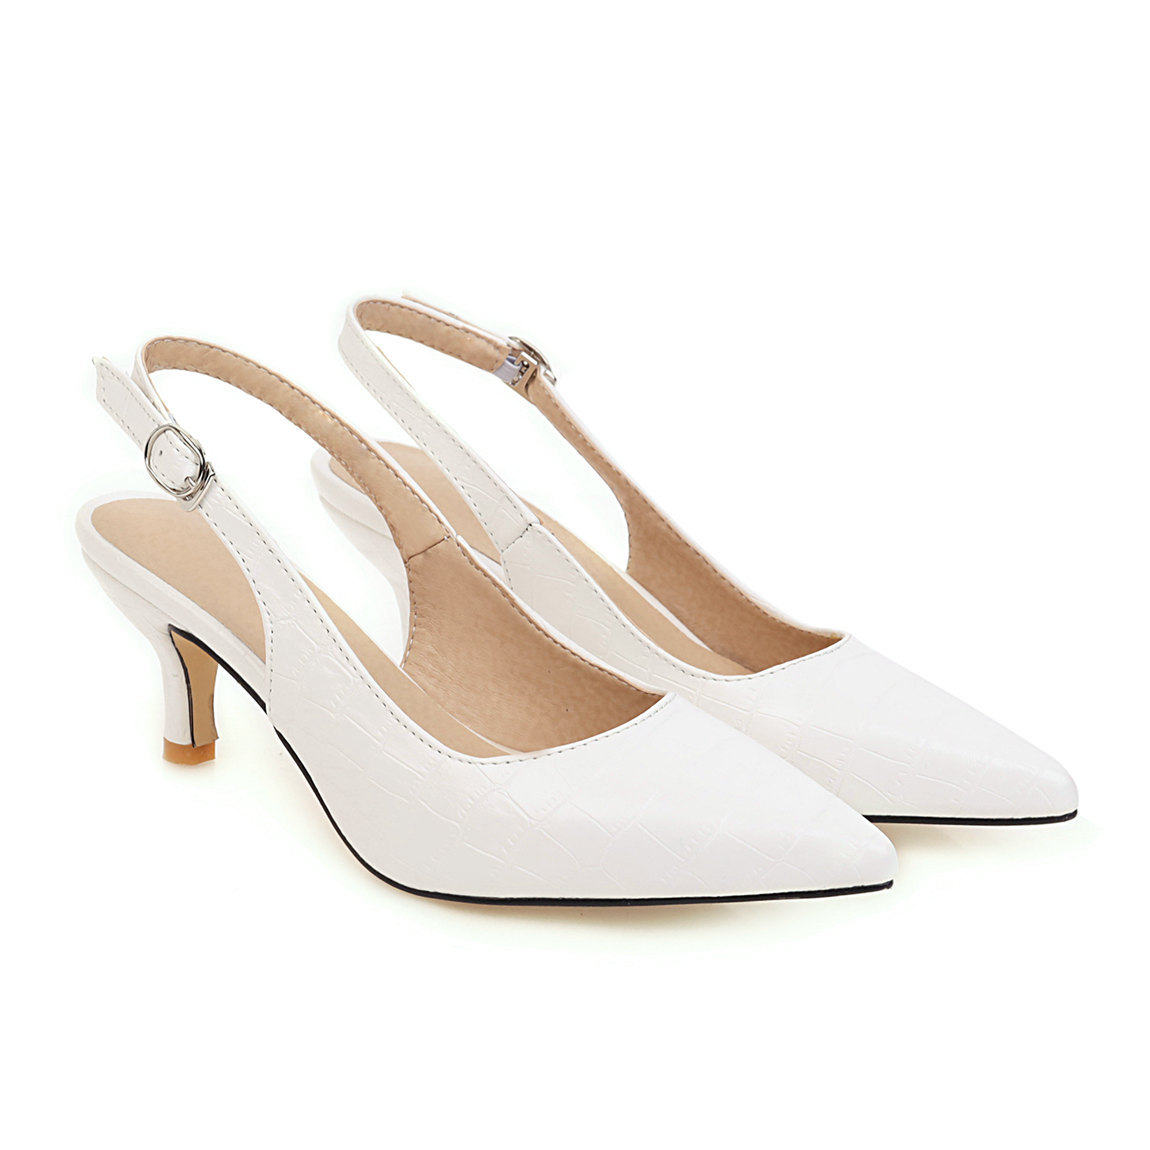 Nicole Hoyt Women's Step 'N Flex Babbsy Pointed-Toe Slingback Pumps Shoes WHITE CROC Your office look combines fashion and comfort when you're in Babbsy pumps featuring Step N Flex technology for all-day stylish wear. 2-1/4" wrapped heel. Pointed-toe sling-back pumps with adjustable buckle closure at back strap. Manmade lining, manmade upper, manmade outsole.